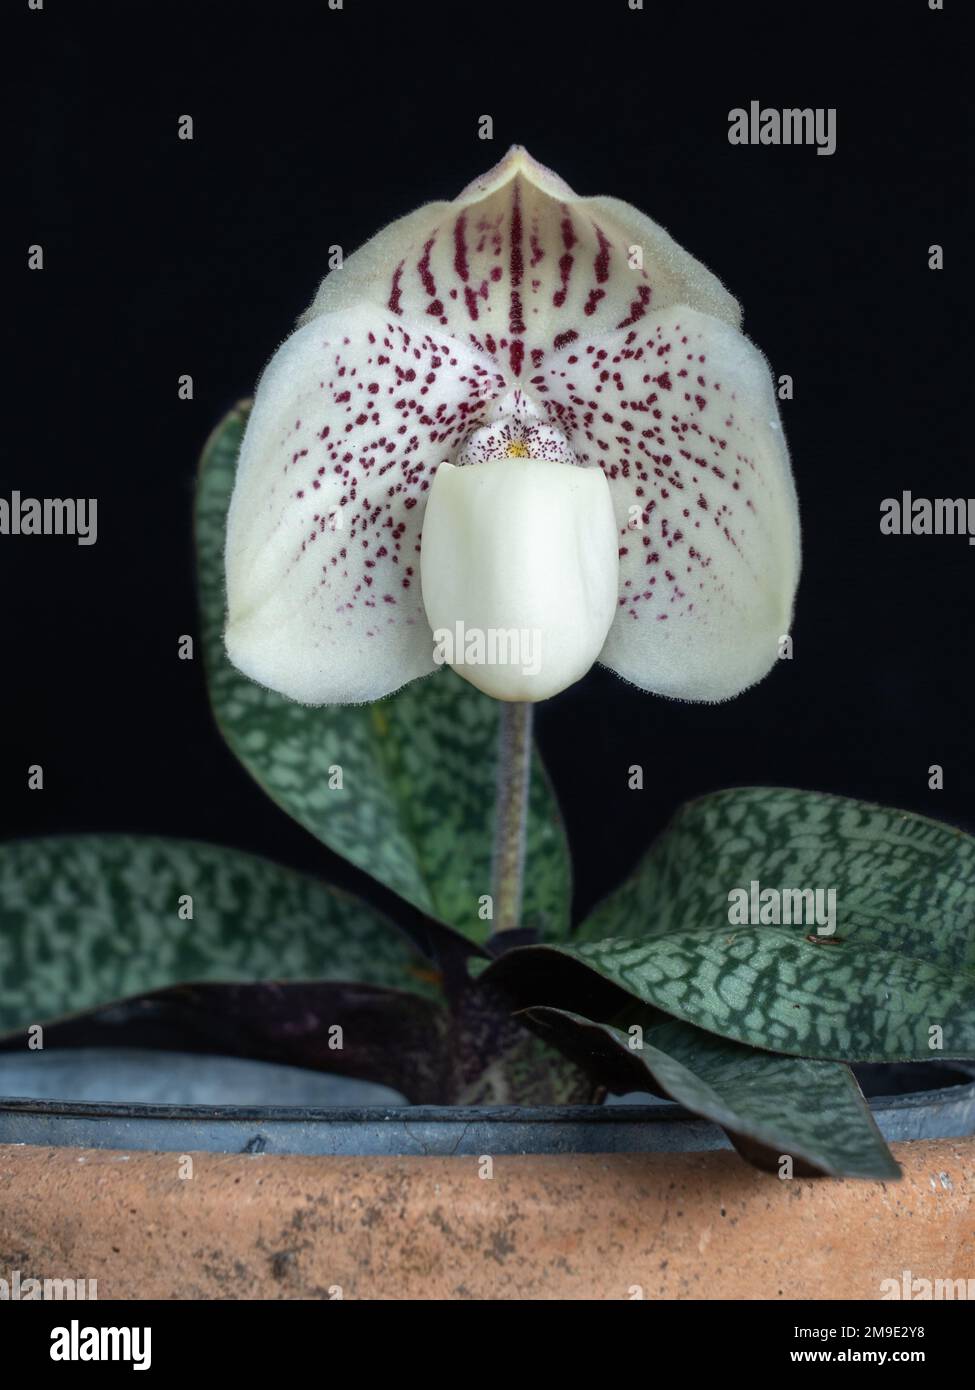 Close-up view of white and purple flower of paphiopedilum godefroyae var ang-thong, a wild orchid species from Thailand, isolated on black background Stock Photo